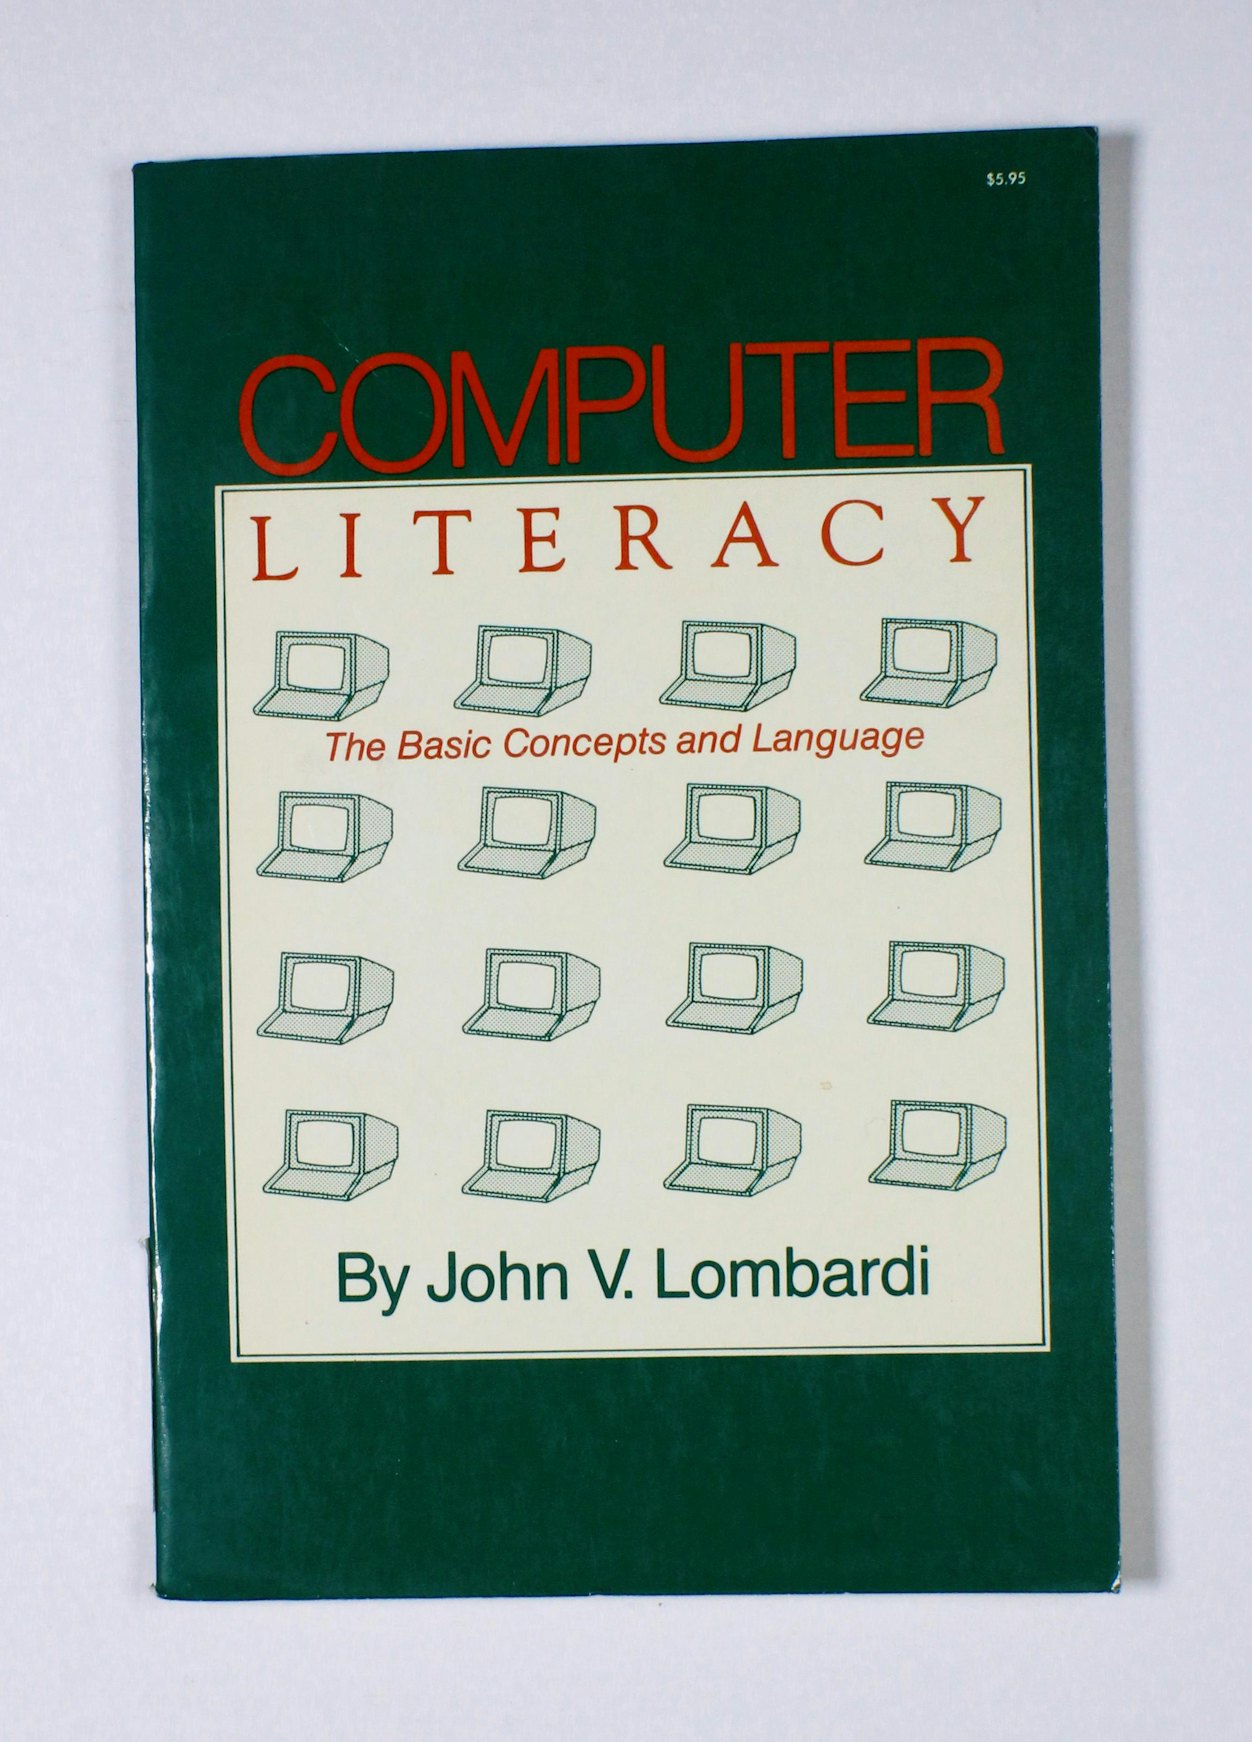 Computer Literacy: The Basic Concepts and Language